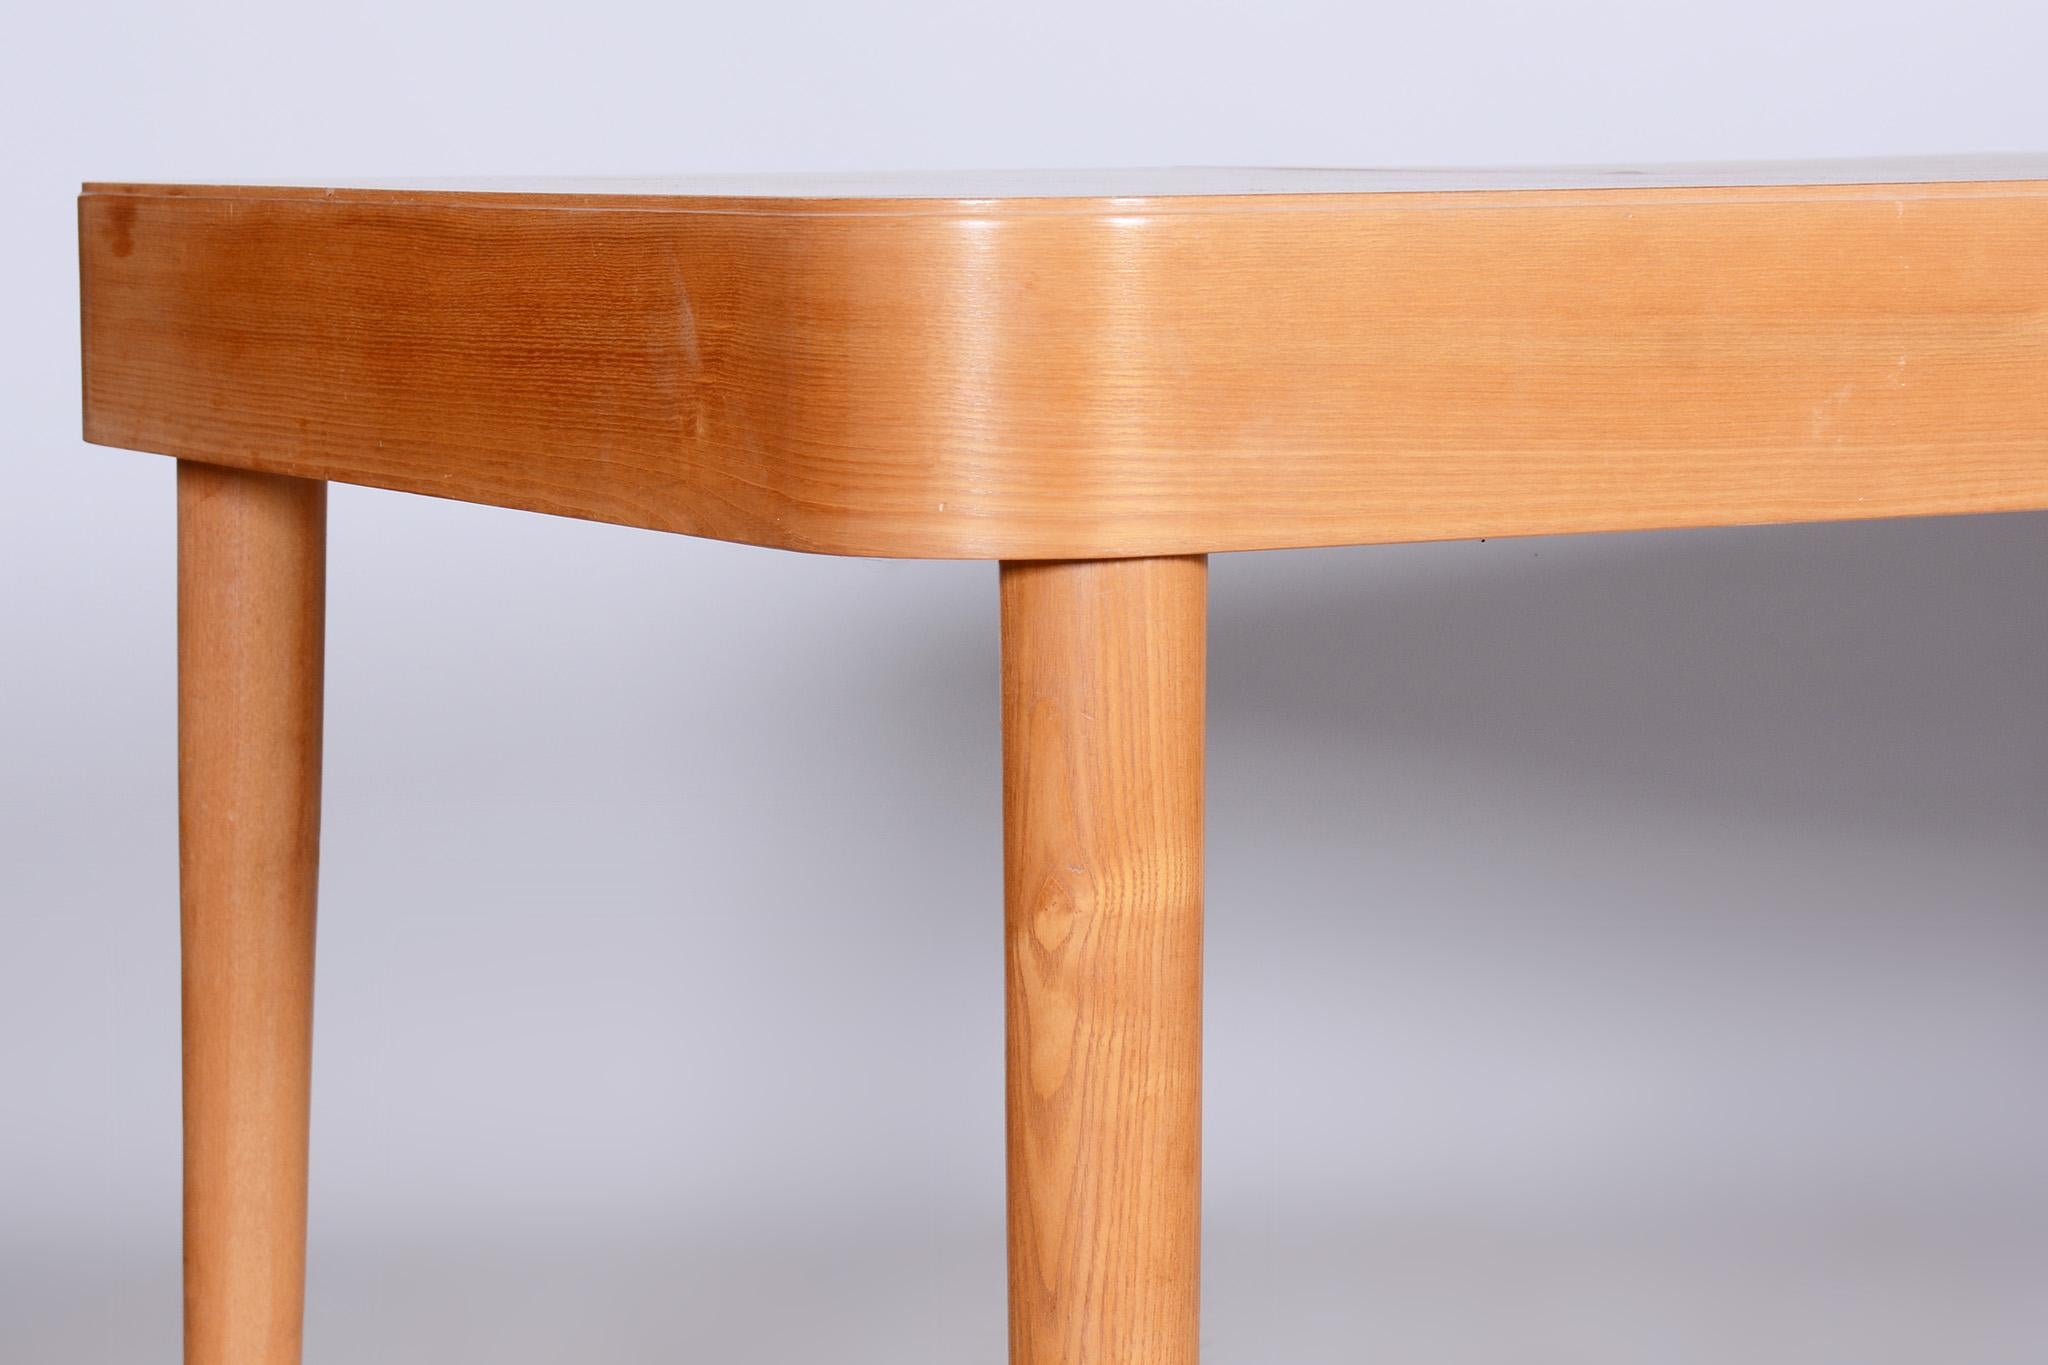 Wood Midcentury Ash Dining Table, Made by Uluv, Revived Polish, Czechia, 1950s For Sale